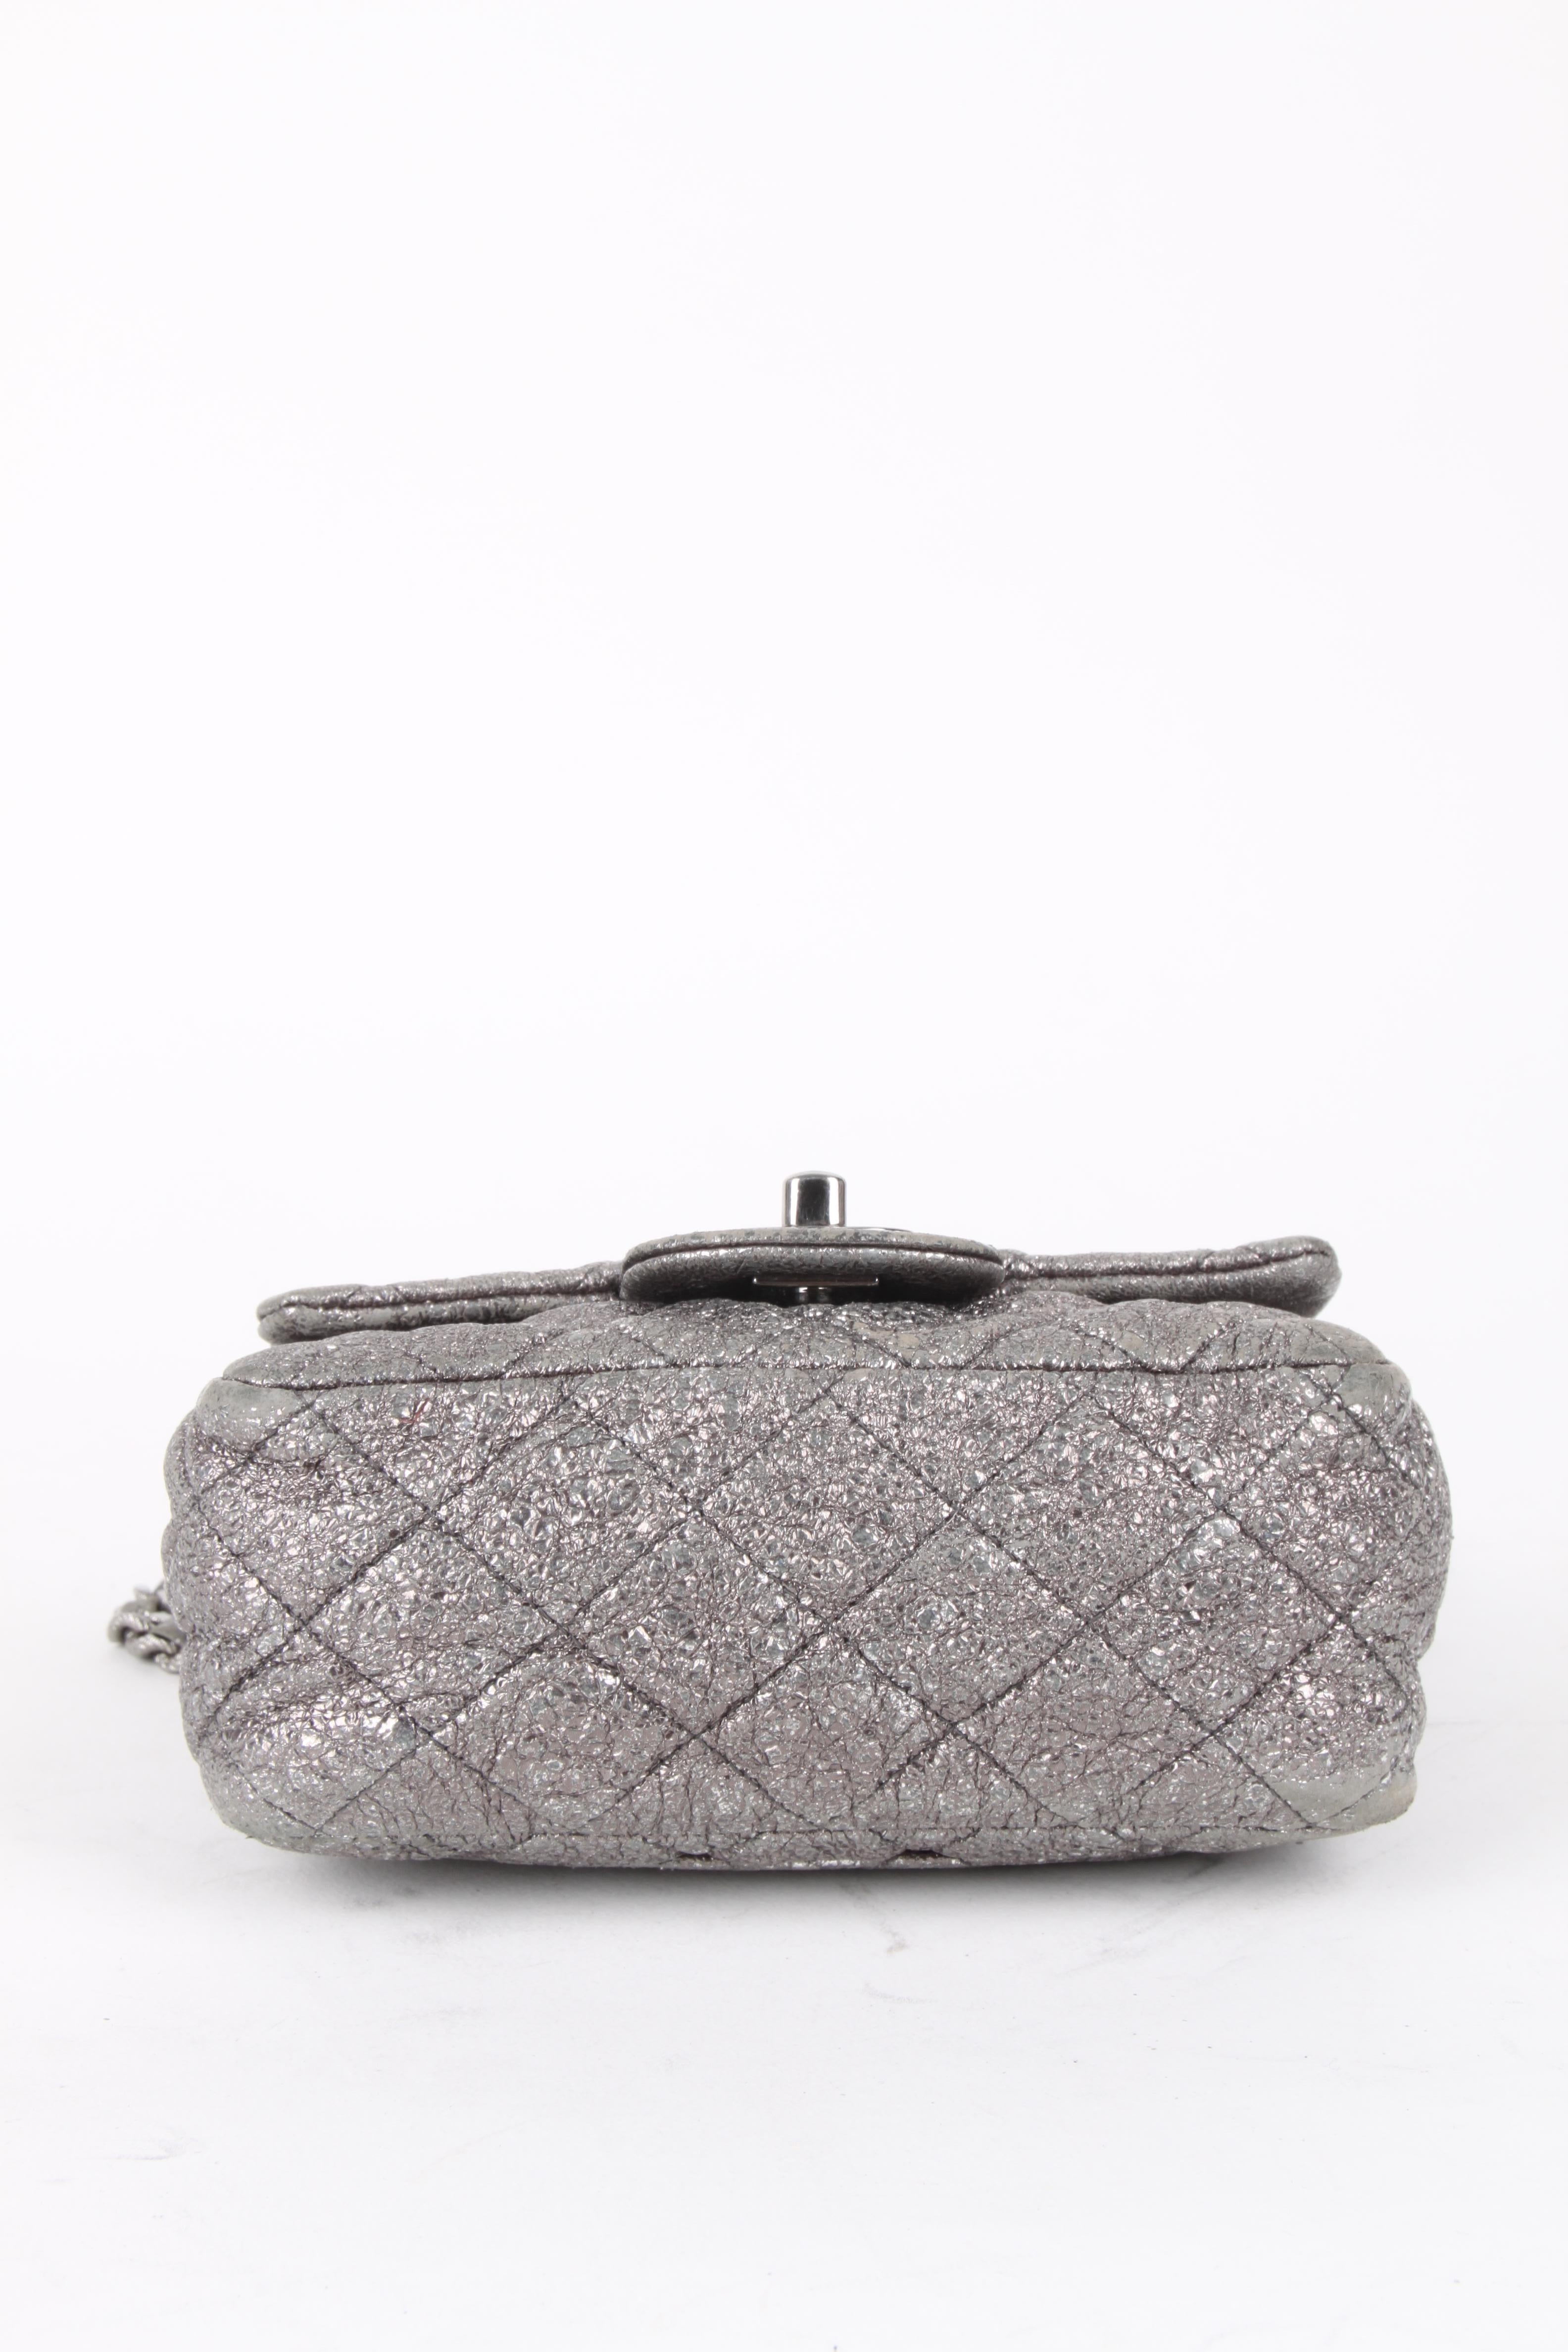 Women's or Men's Chanel Silver Quilted Small Flap Crossbody Bag For Sale